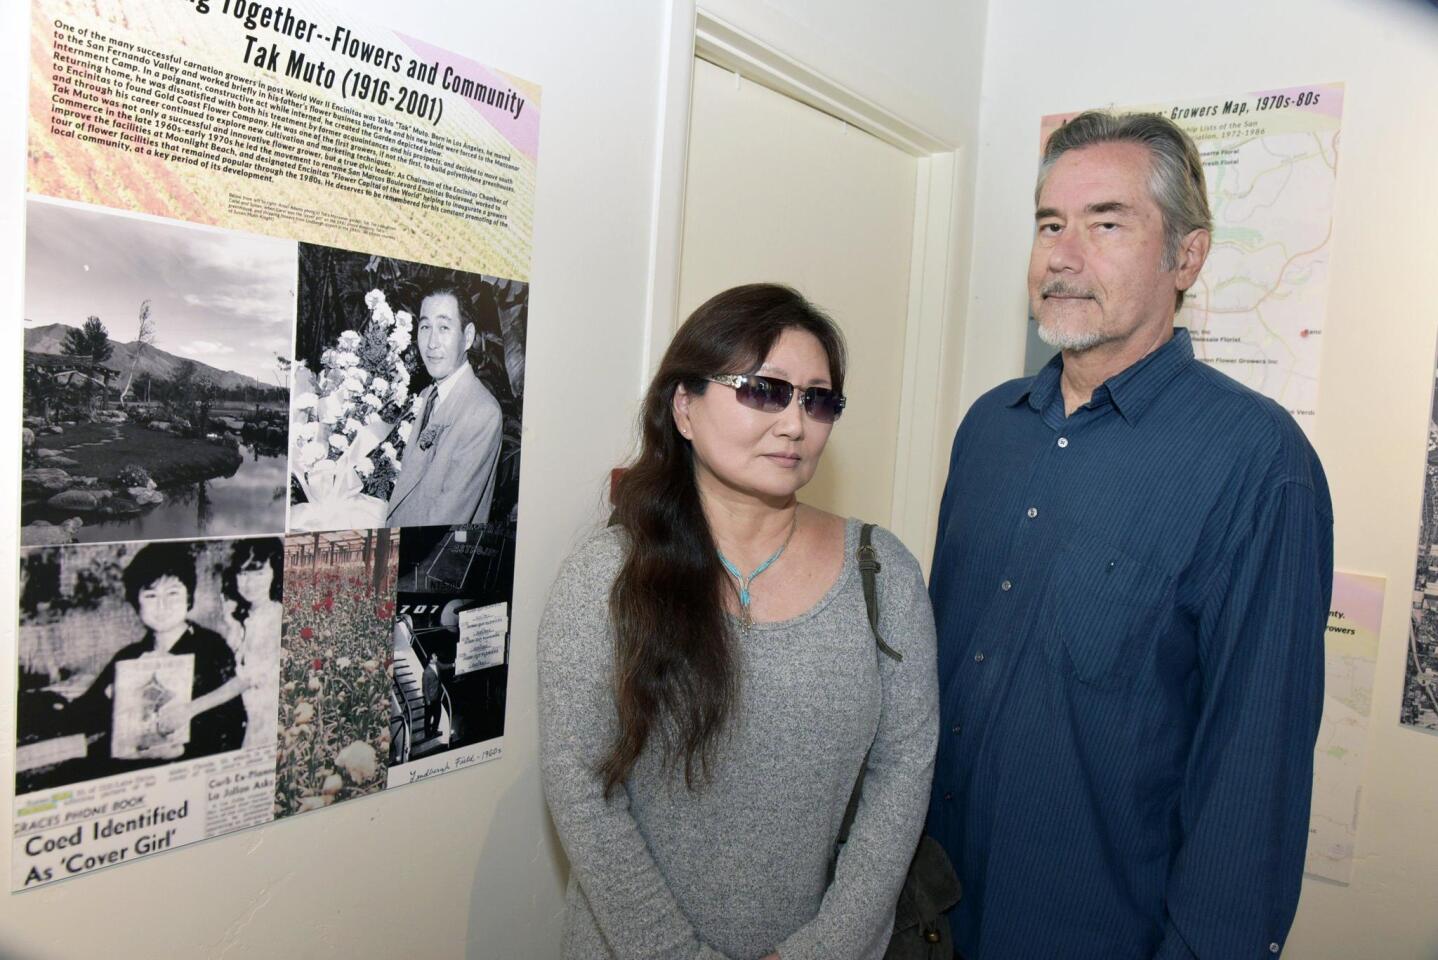 Susan Muto Knight (she is the little girl in the photo) and Anthony Knight next to the exhibit honoring her father, Tak Muto